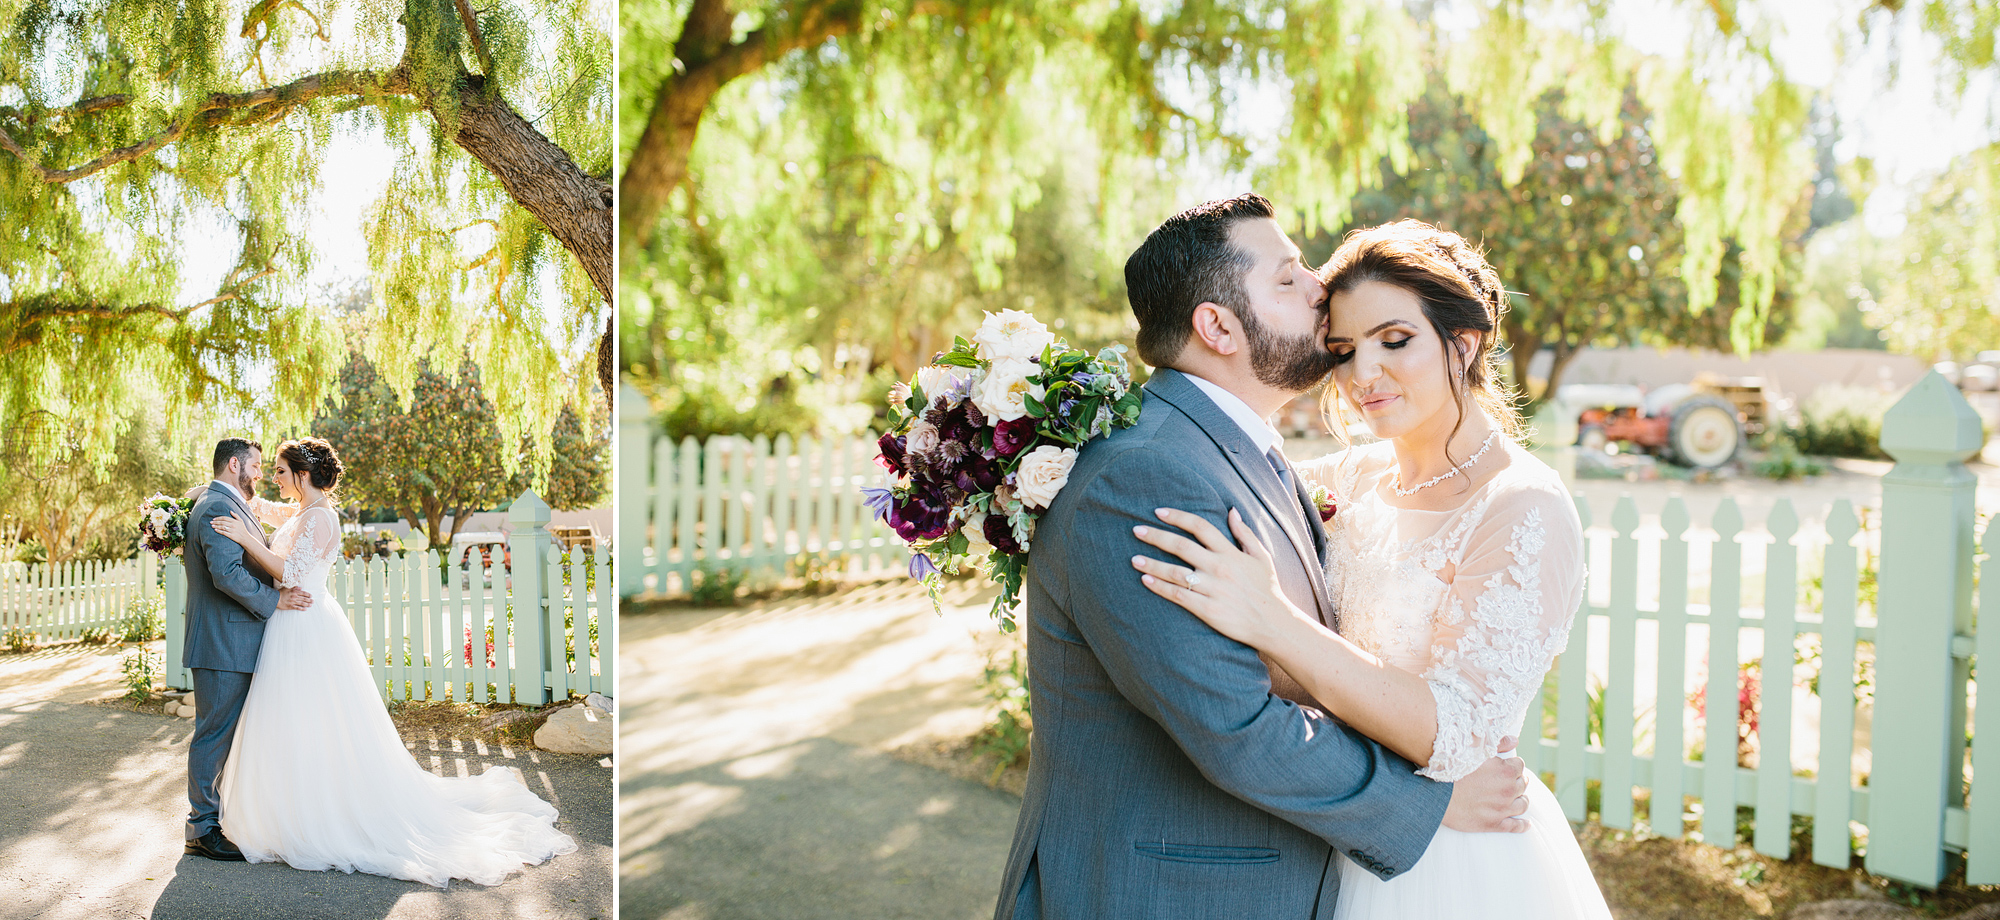 Sweet photos of the bride and groom. 